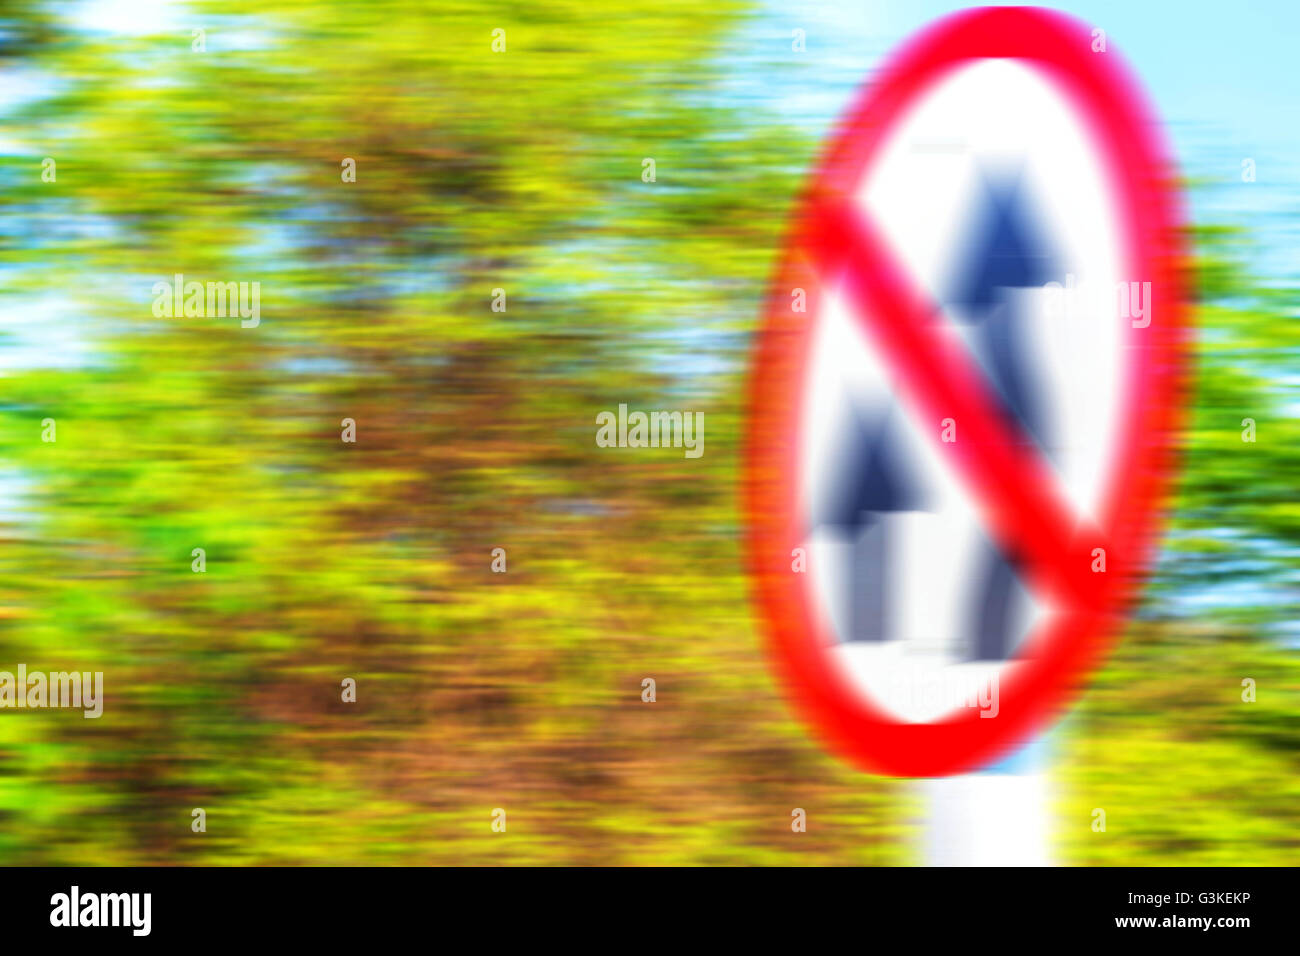 Traffic signs and trees along the road with blurred images. Stock Photo